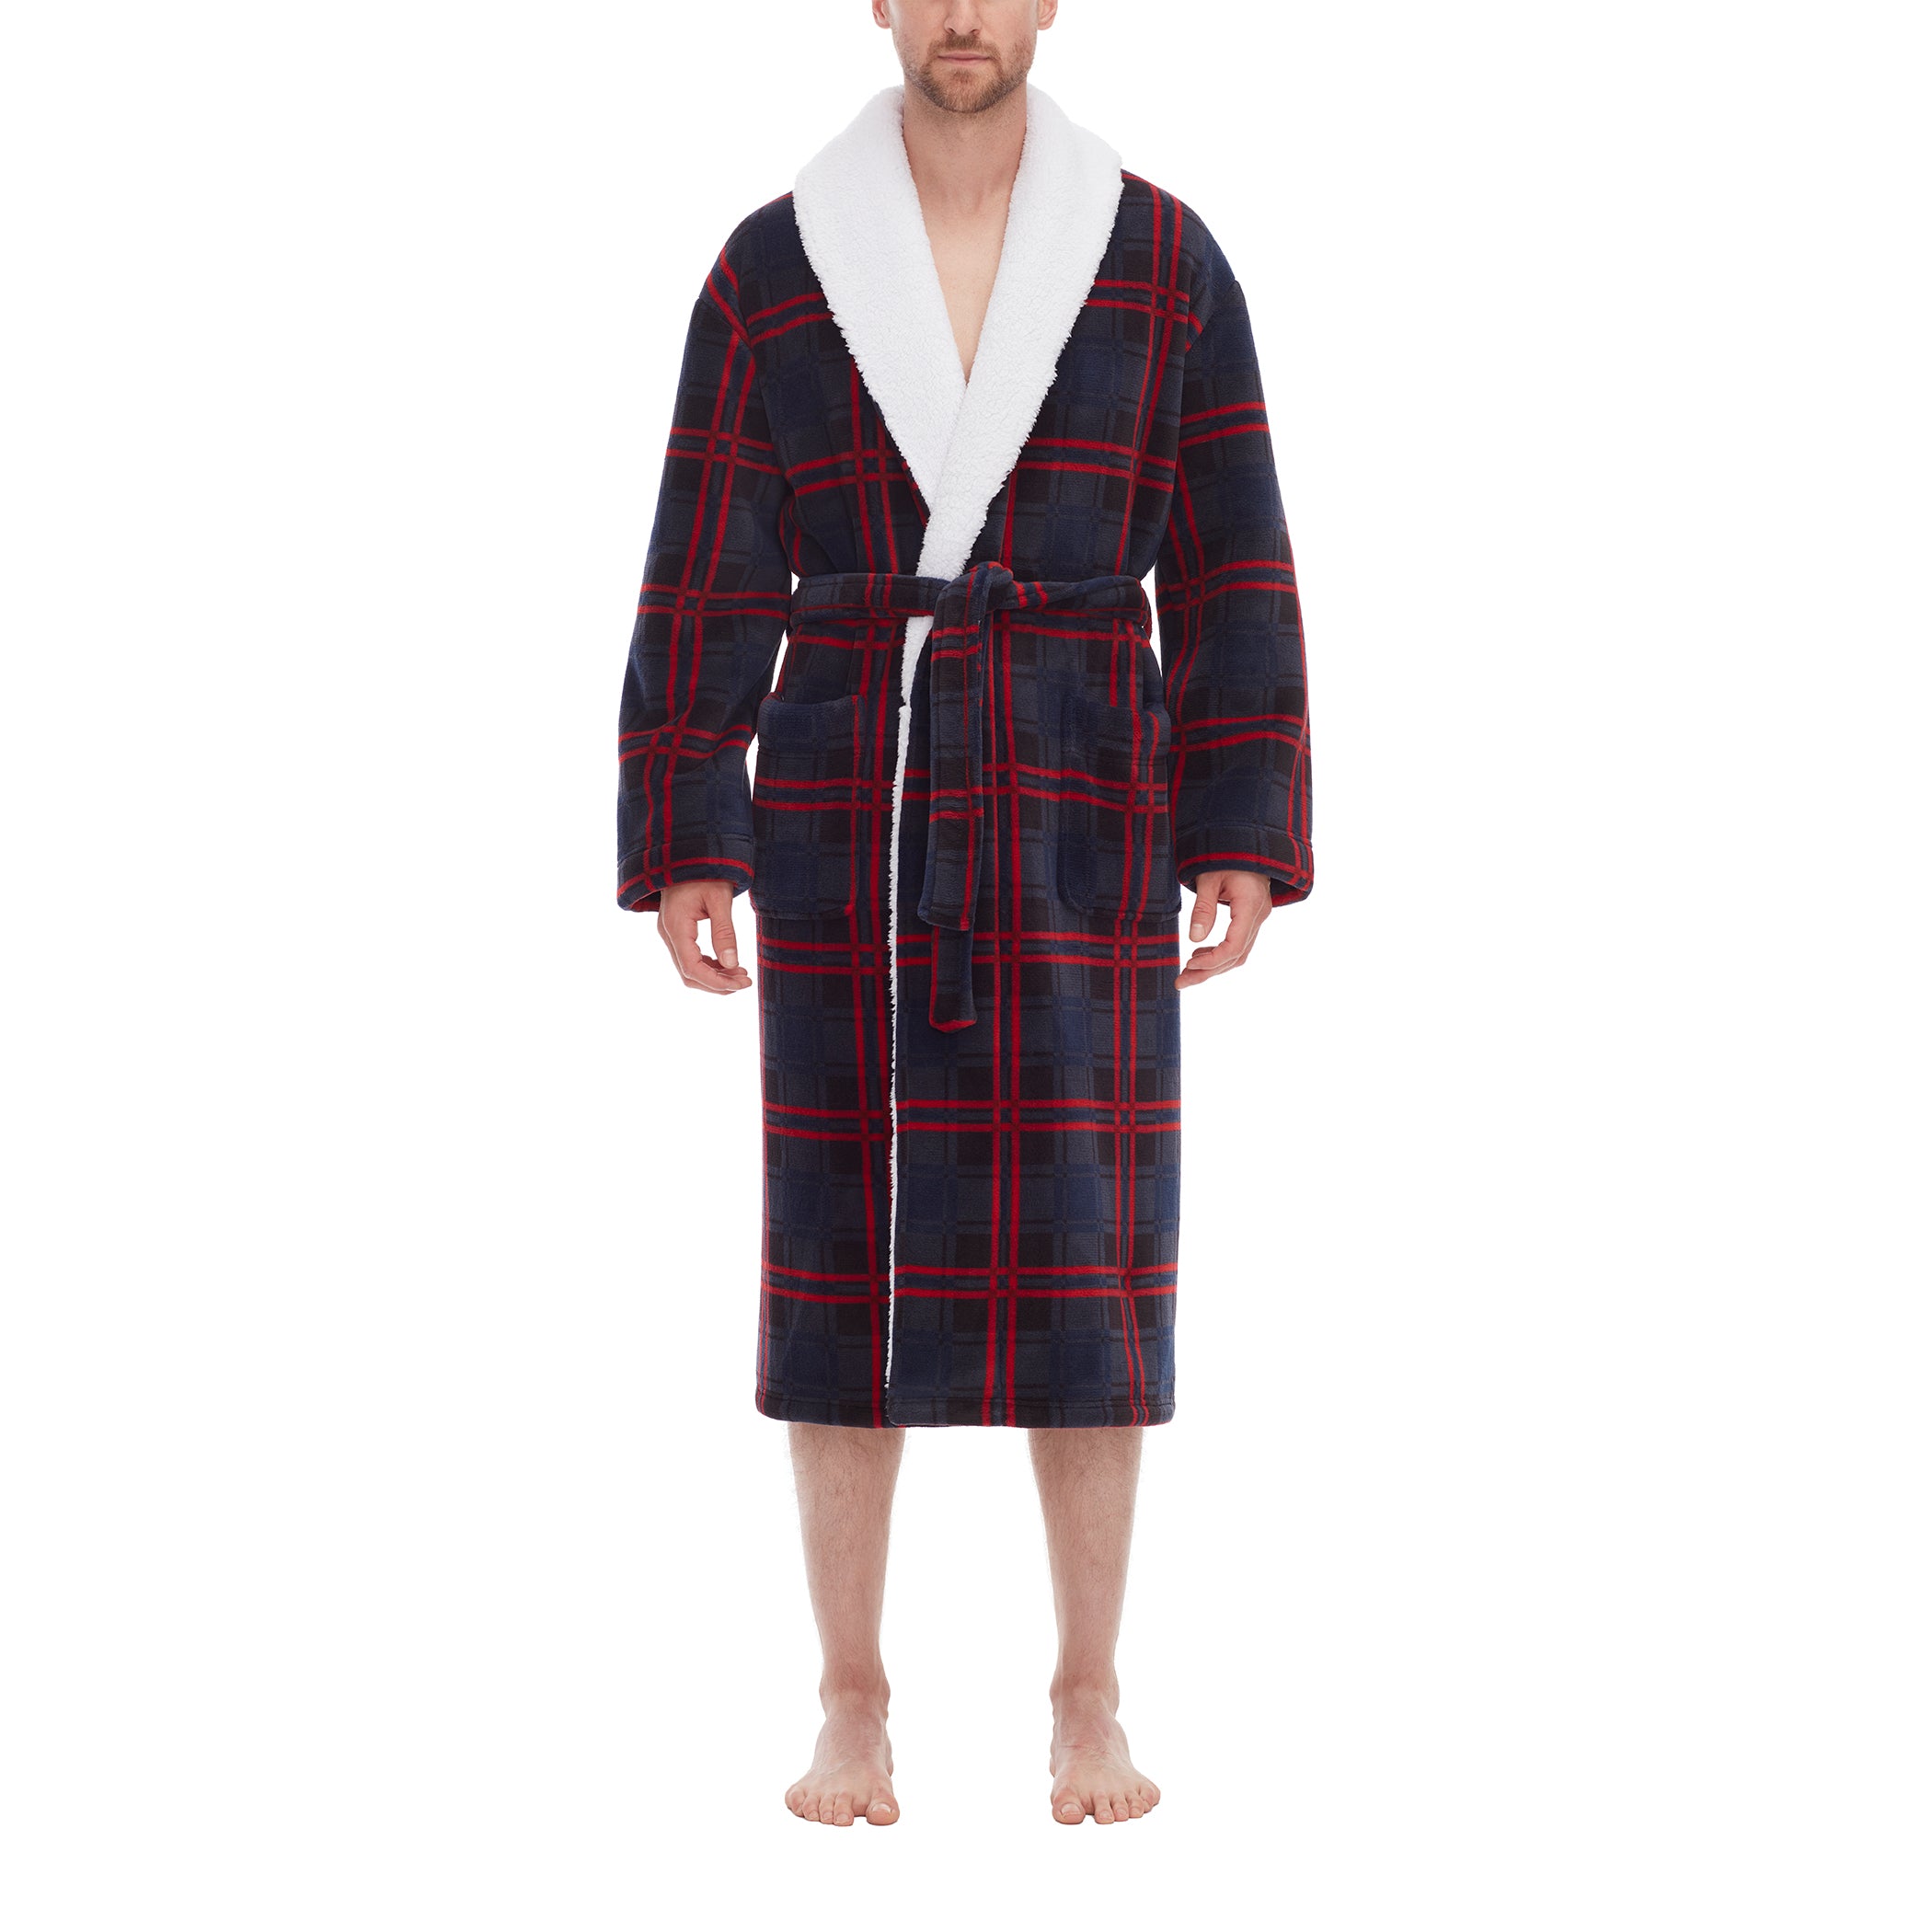 Shawl Robe With Faux Shearling Interior